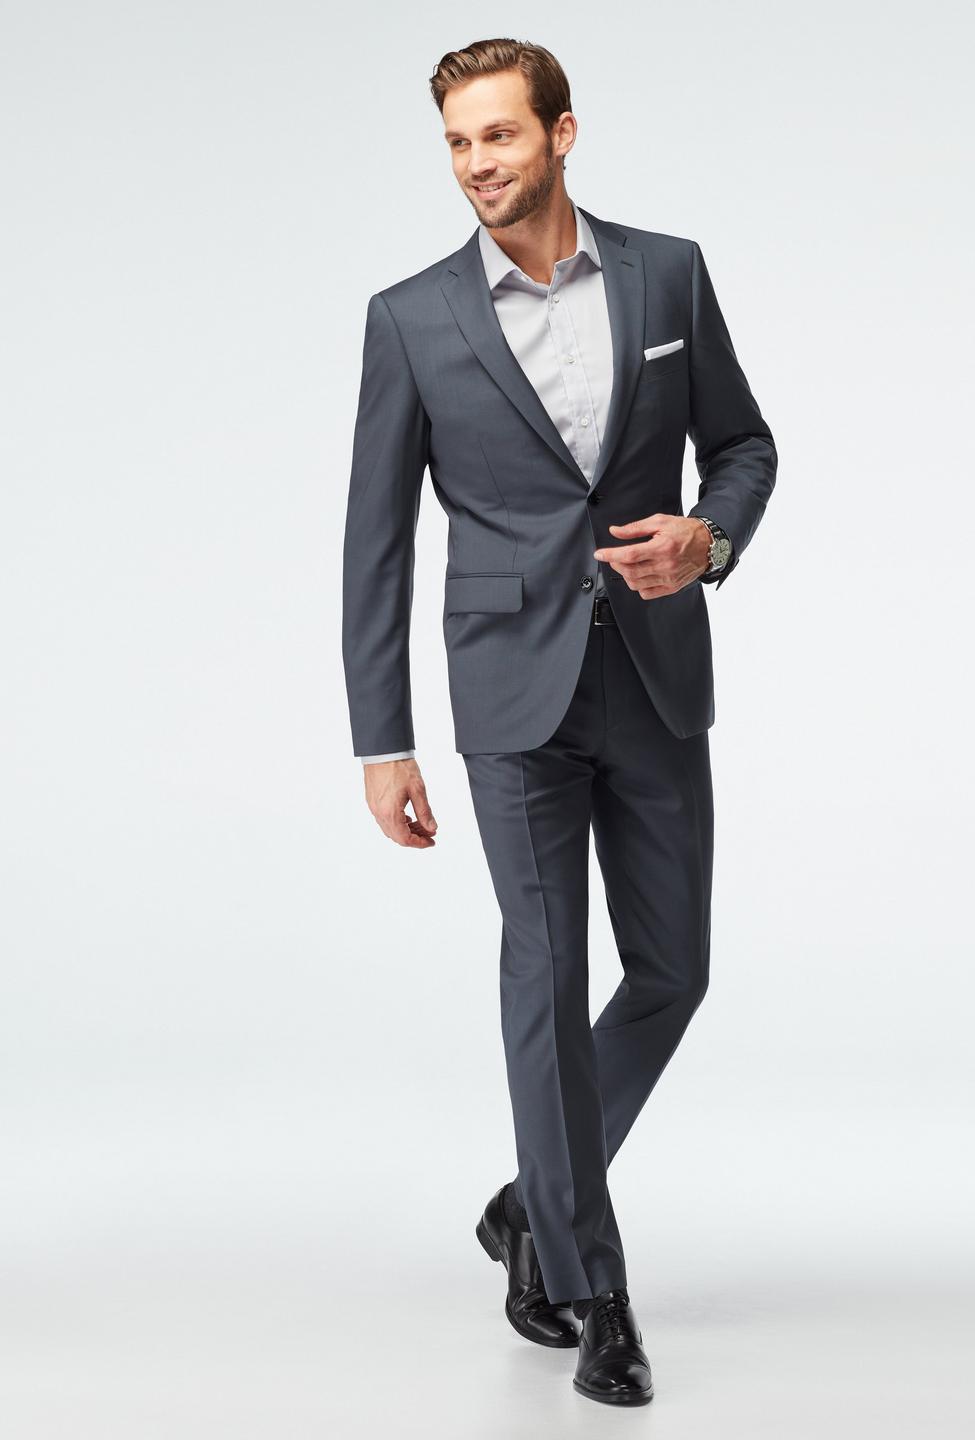 Gray suit - Milano Solid Design from Italian Indochino Collection